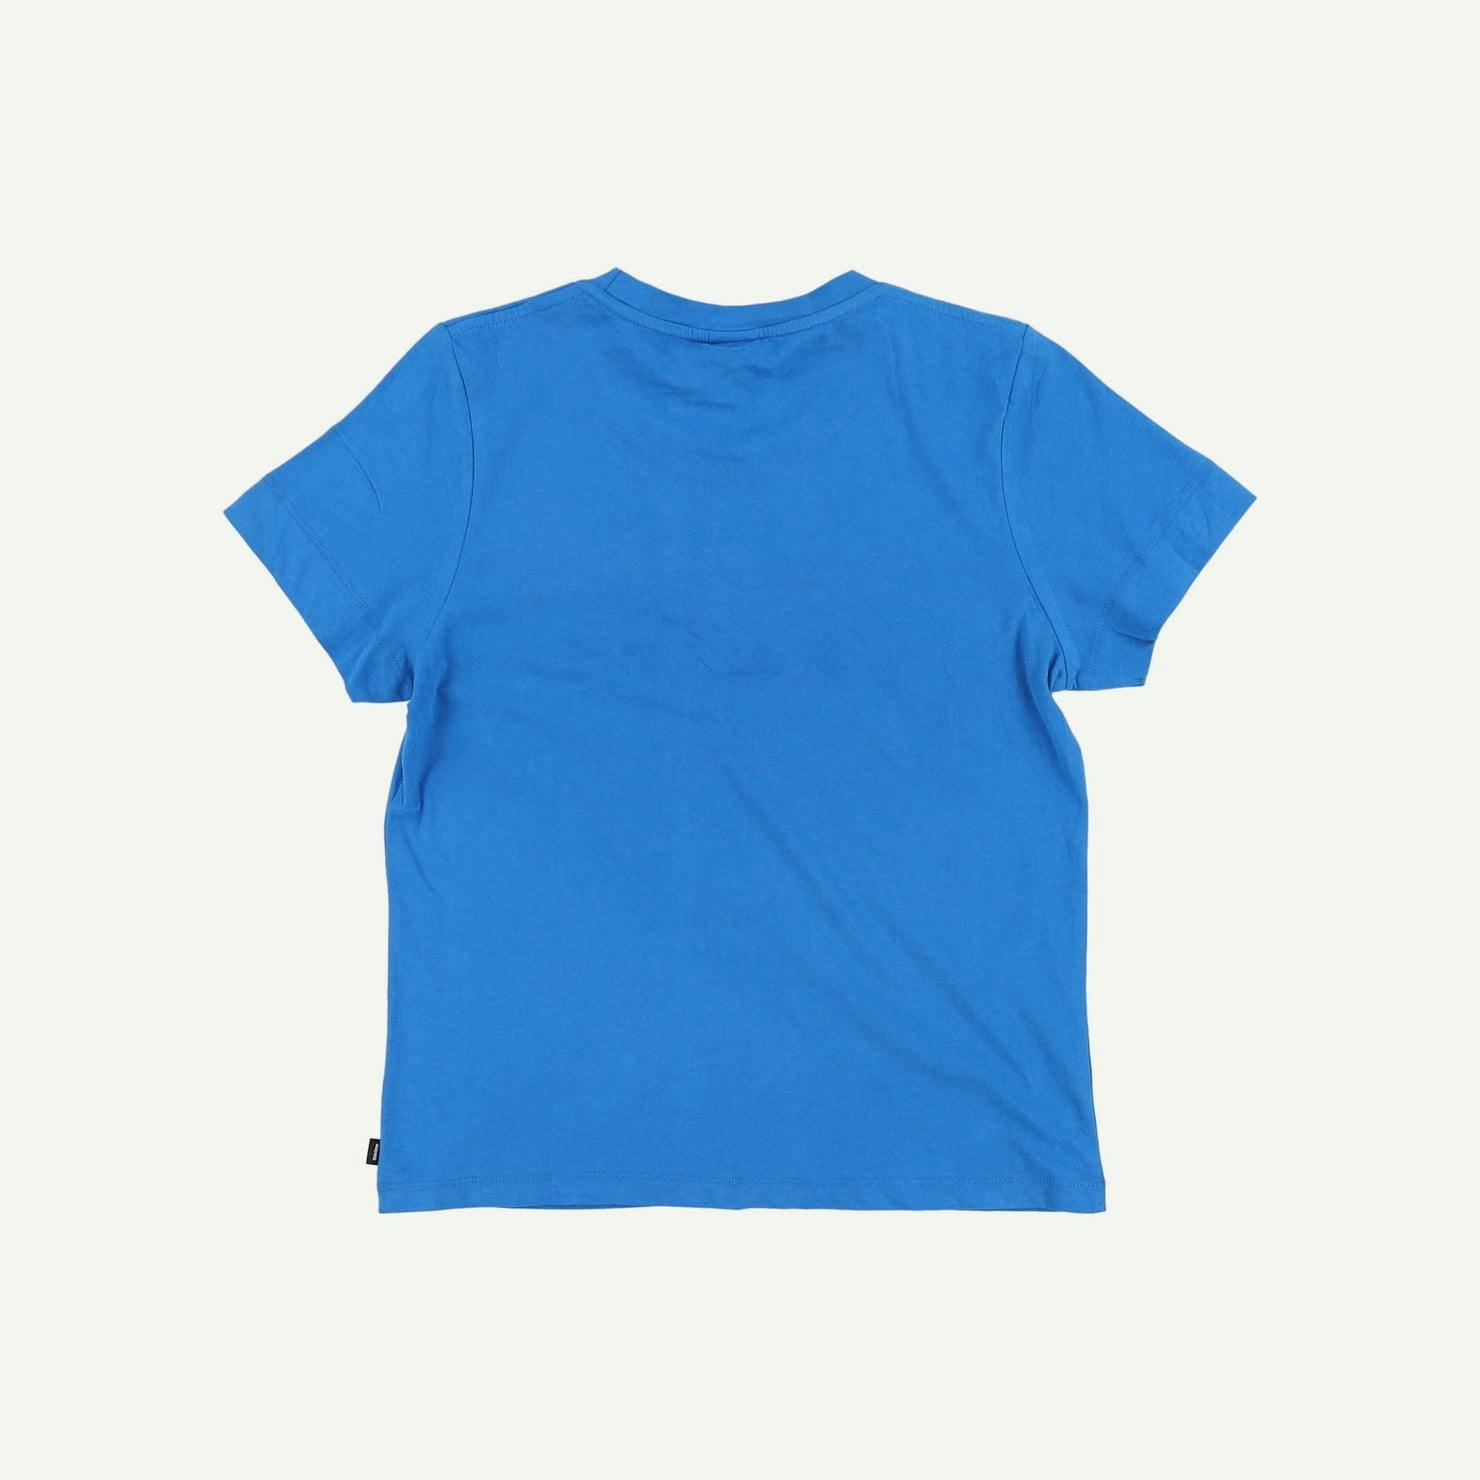 Finisterre Repaired Blue T-shirt